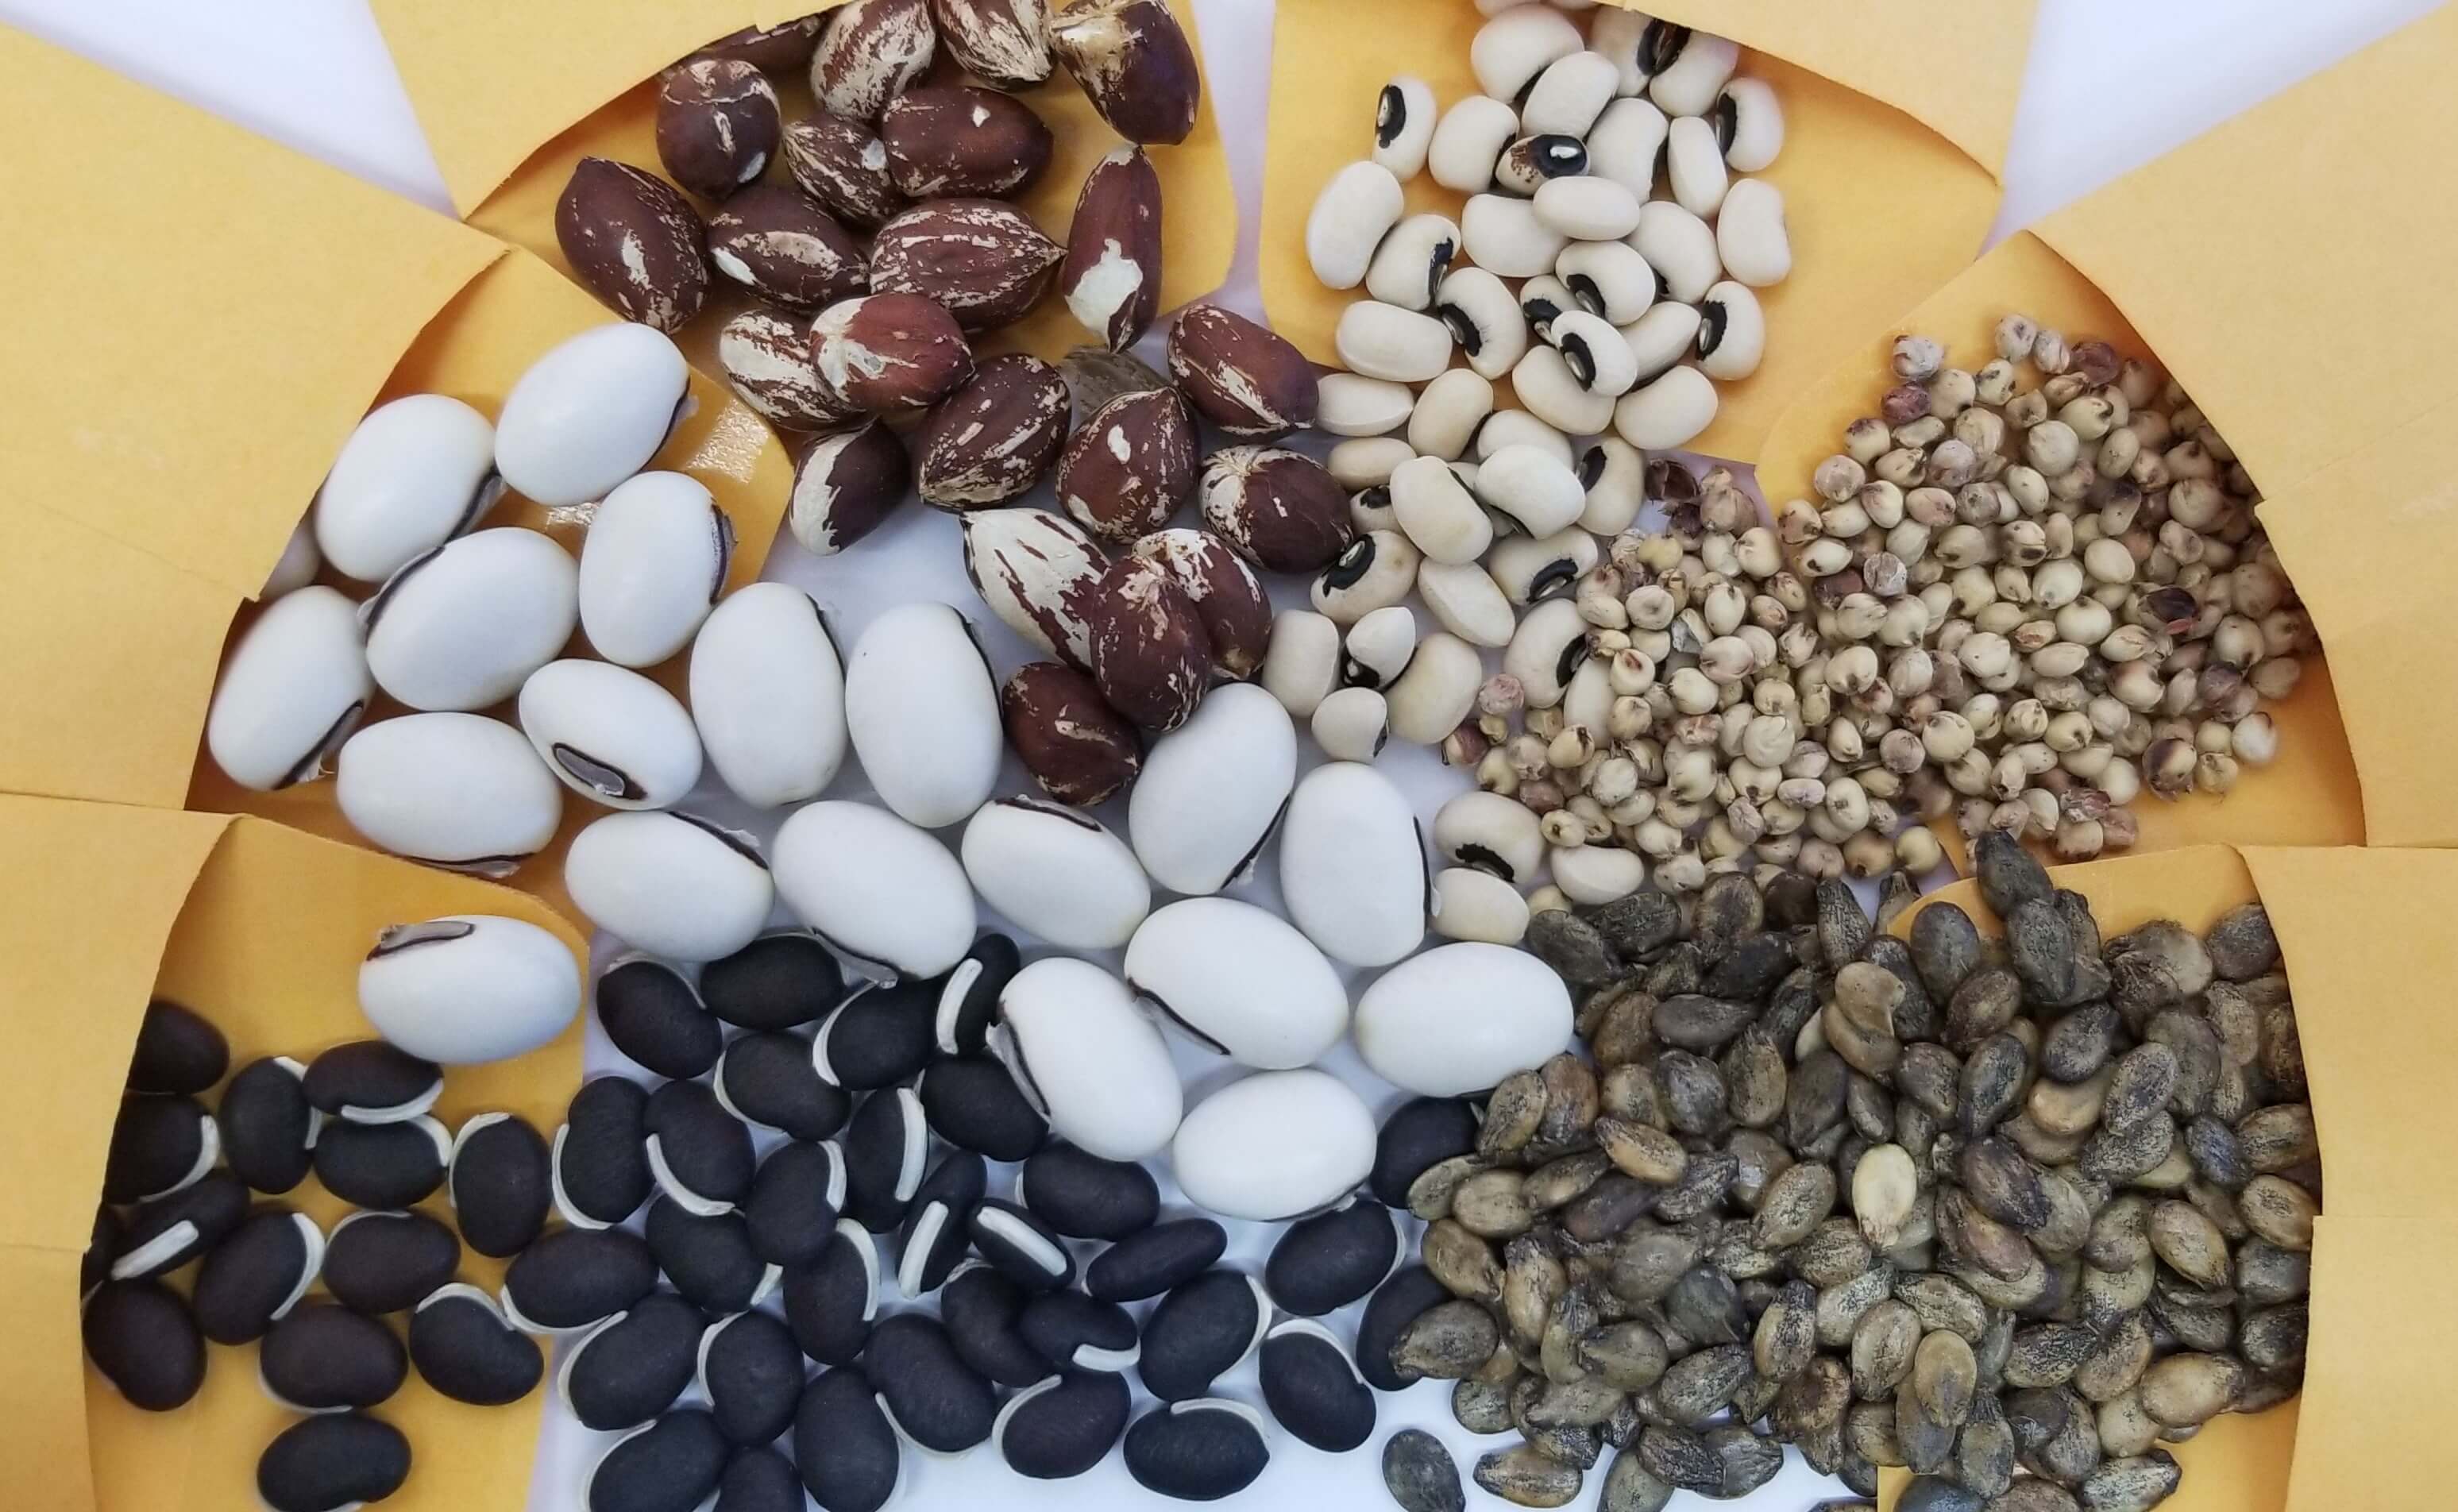 Seeds of different colors, shapes, and sizes from multiple seed packets spill out together